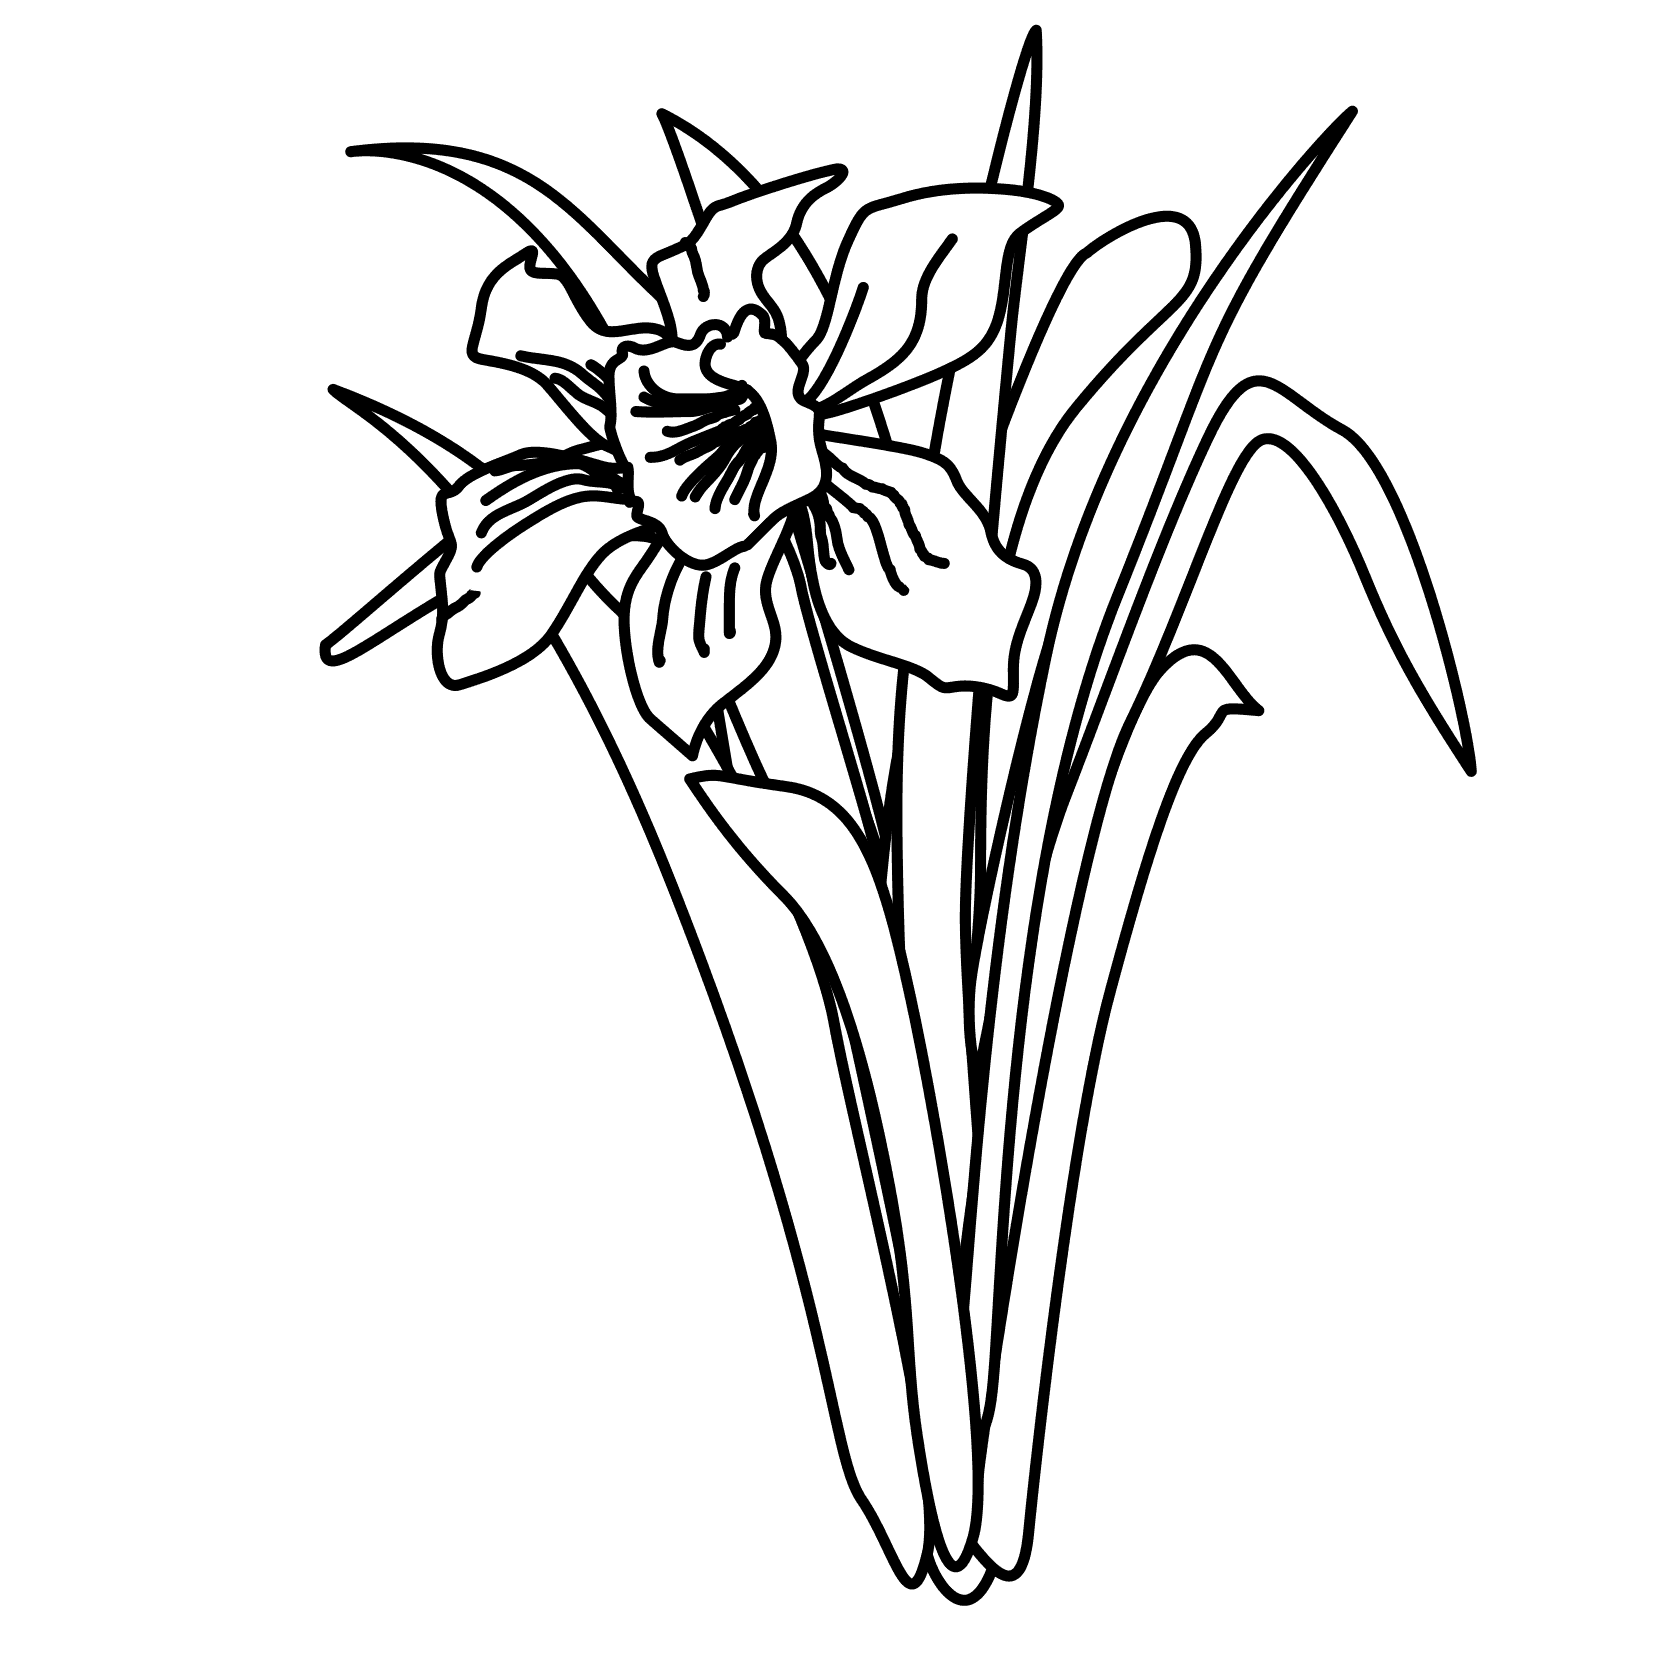 Daffodil Outline - ClipArt Best